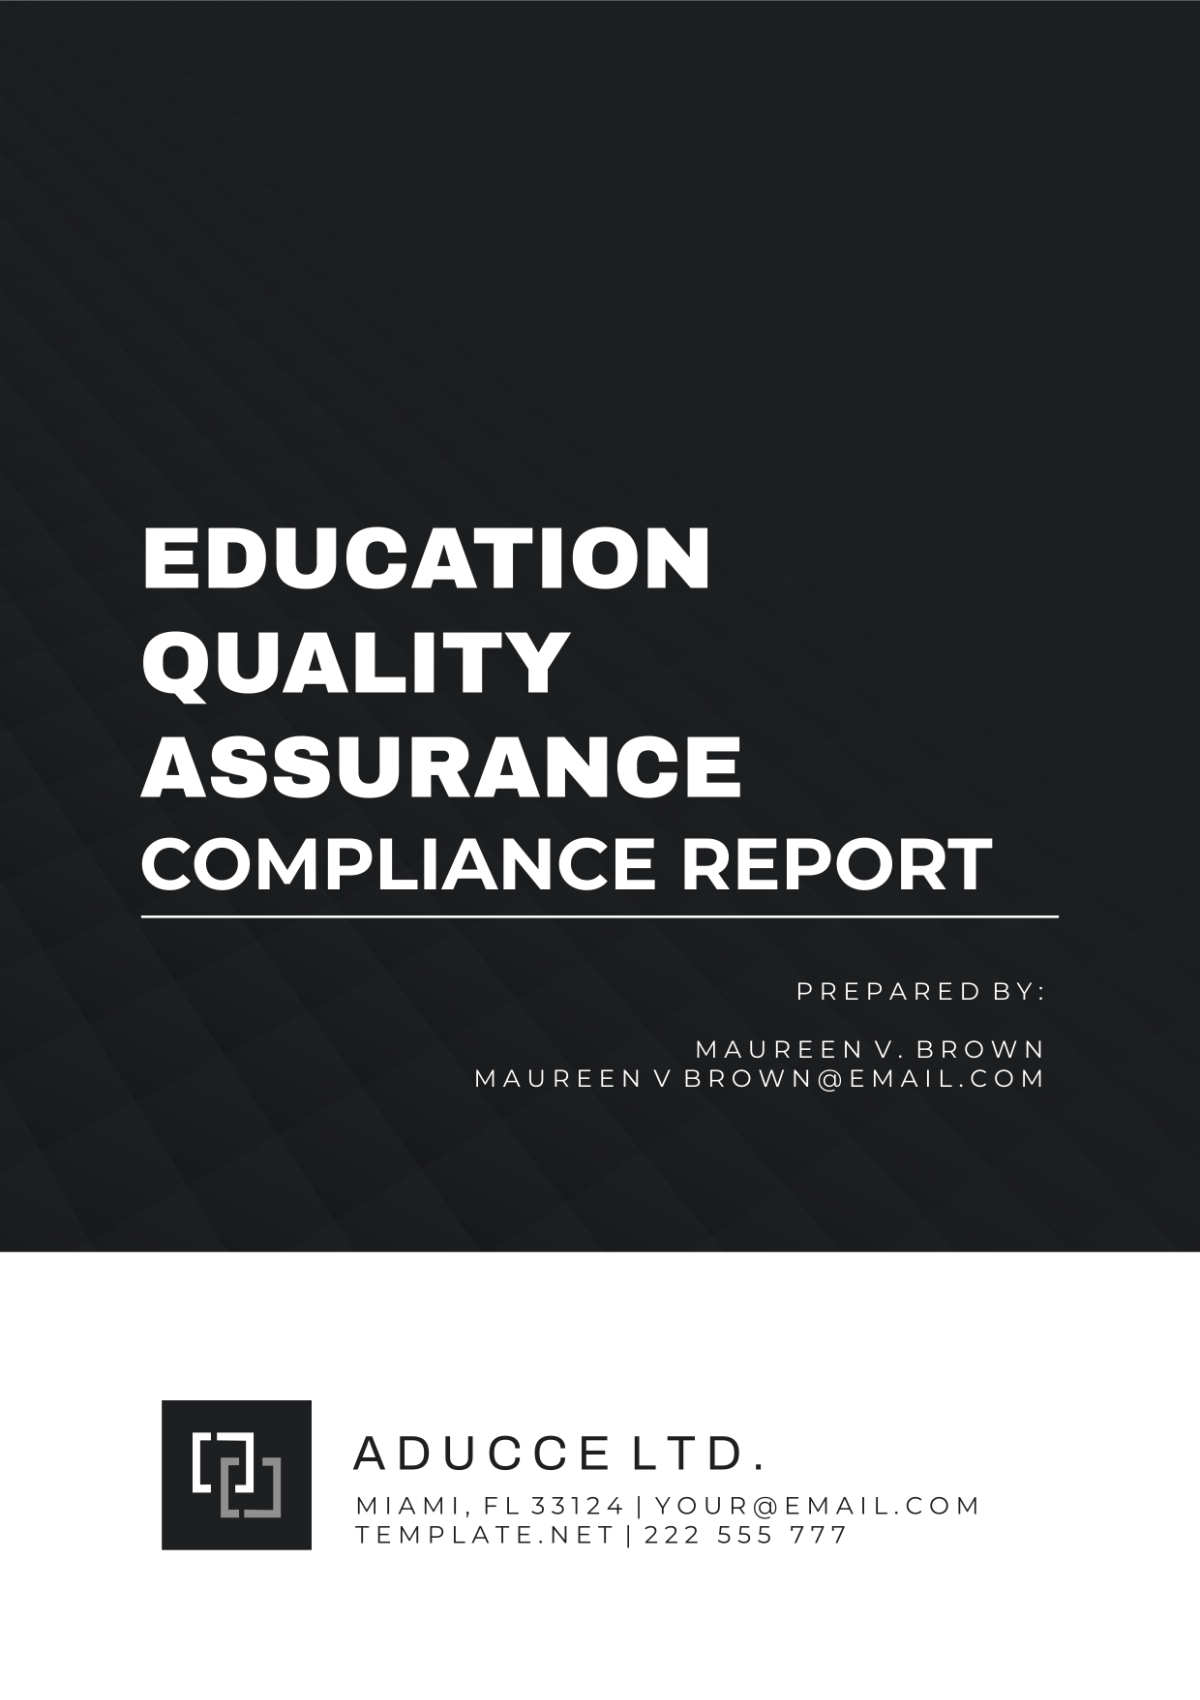 Education Quality Assurance Compliance Report Template